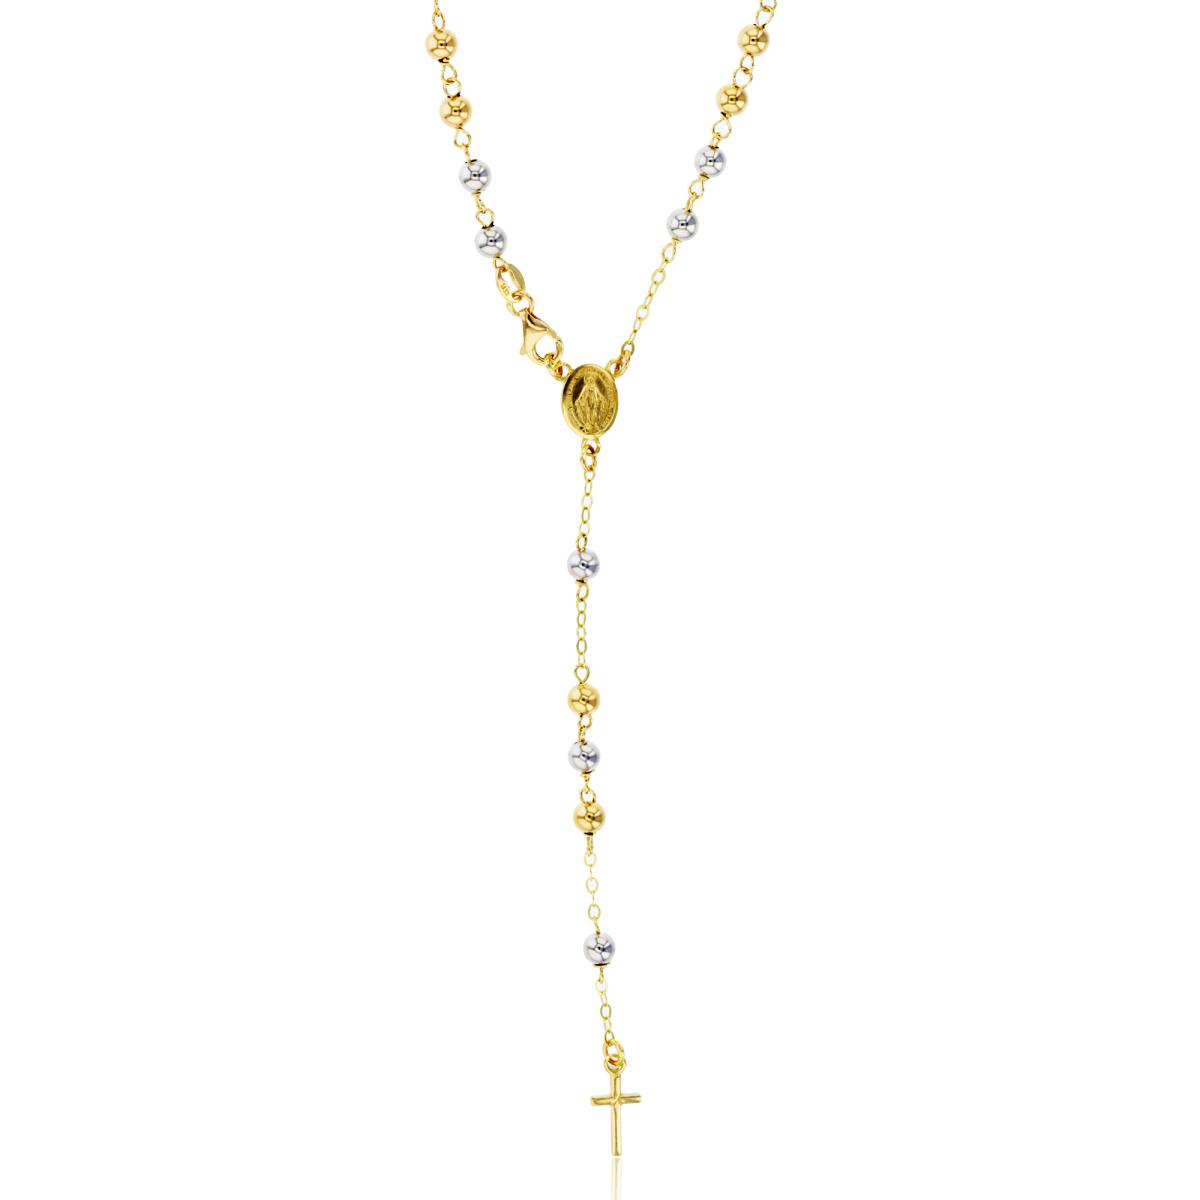 14K Two-Tone Gold 4mm Beads Rosary 24" Necklace